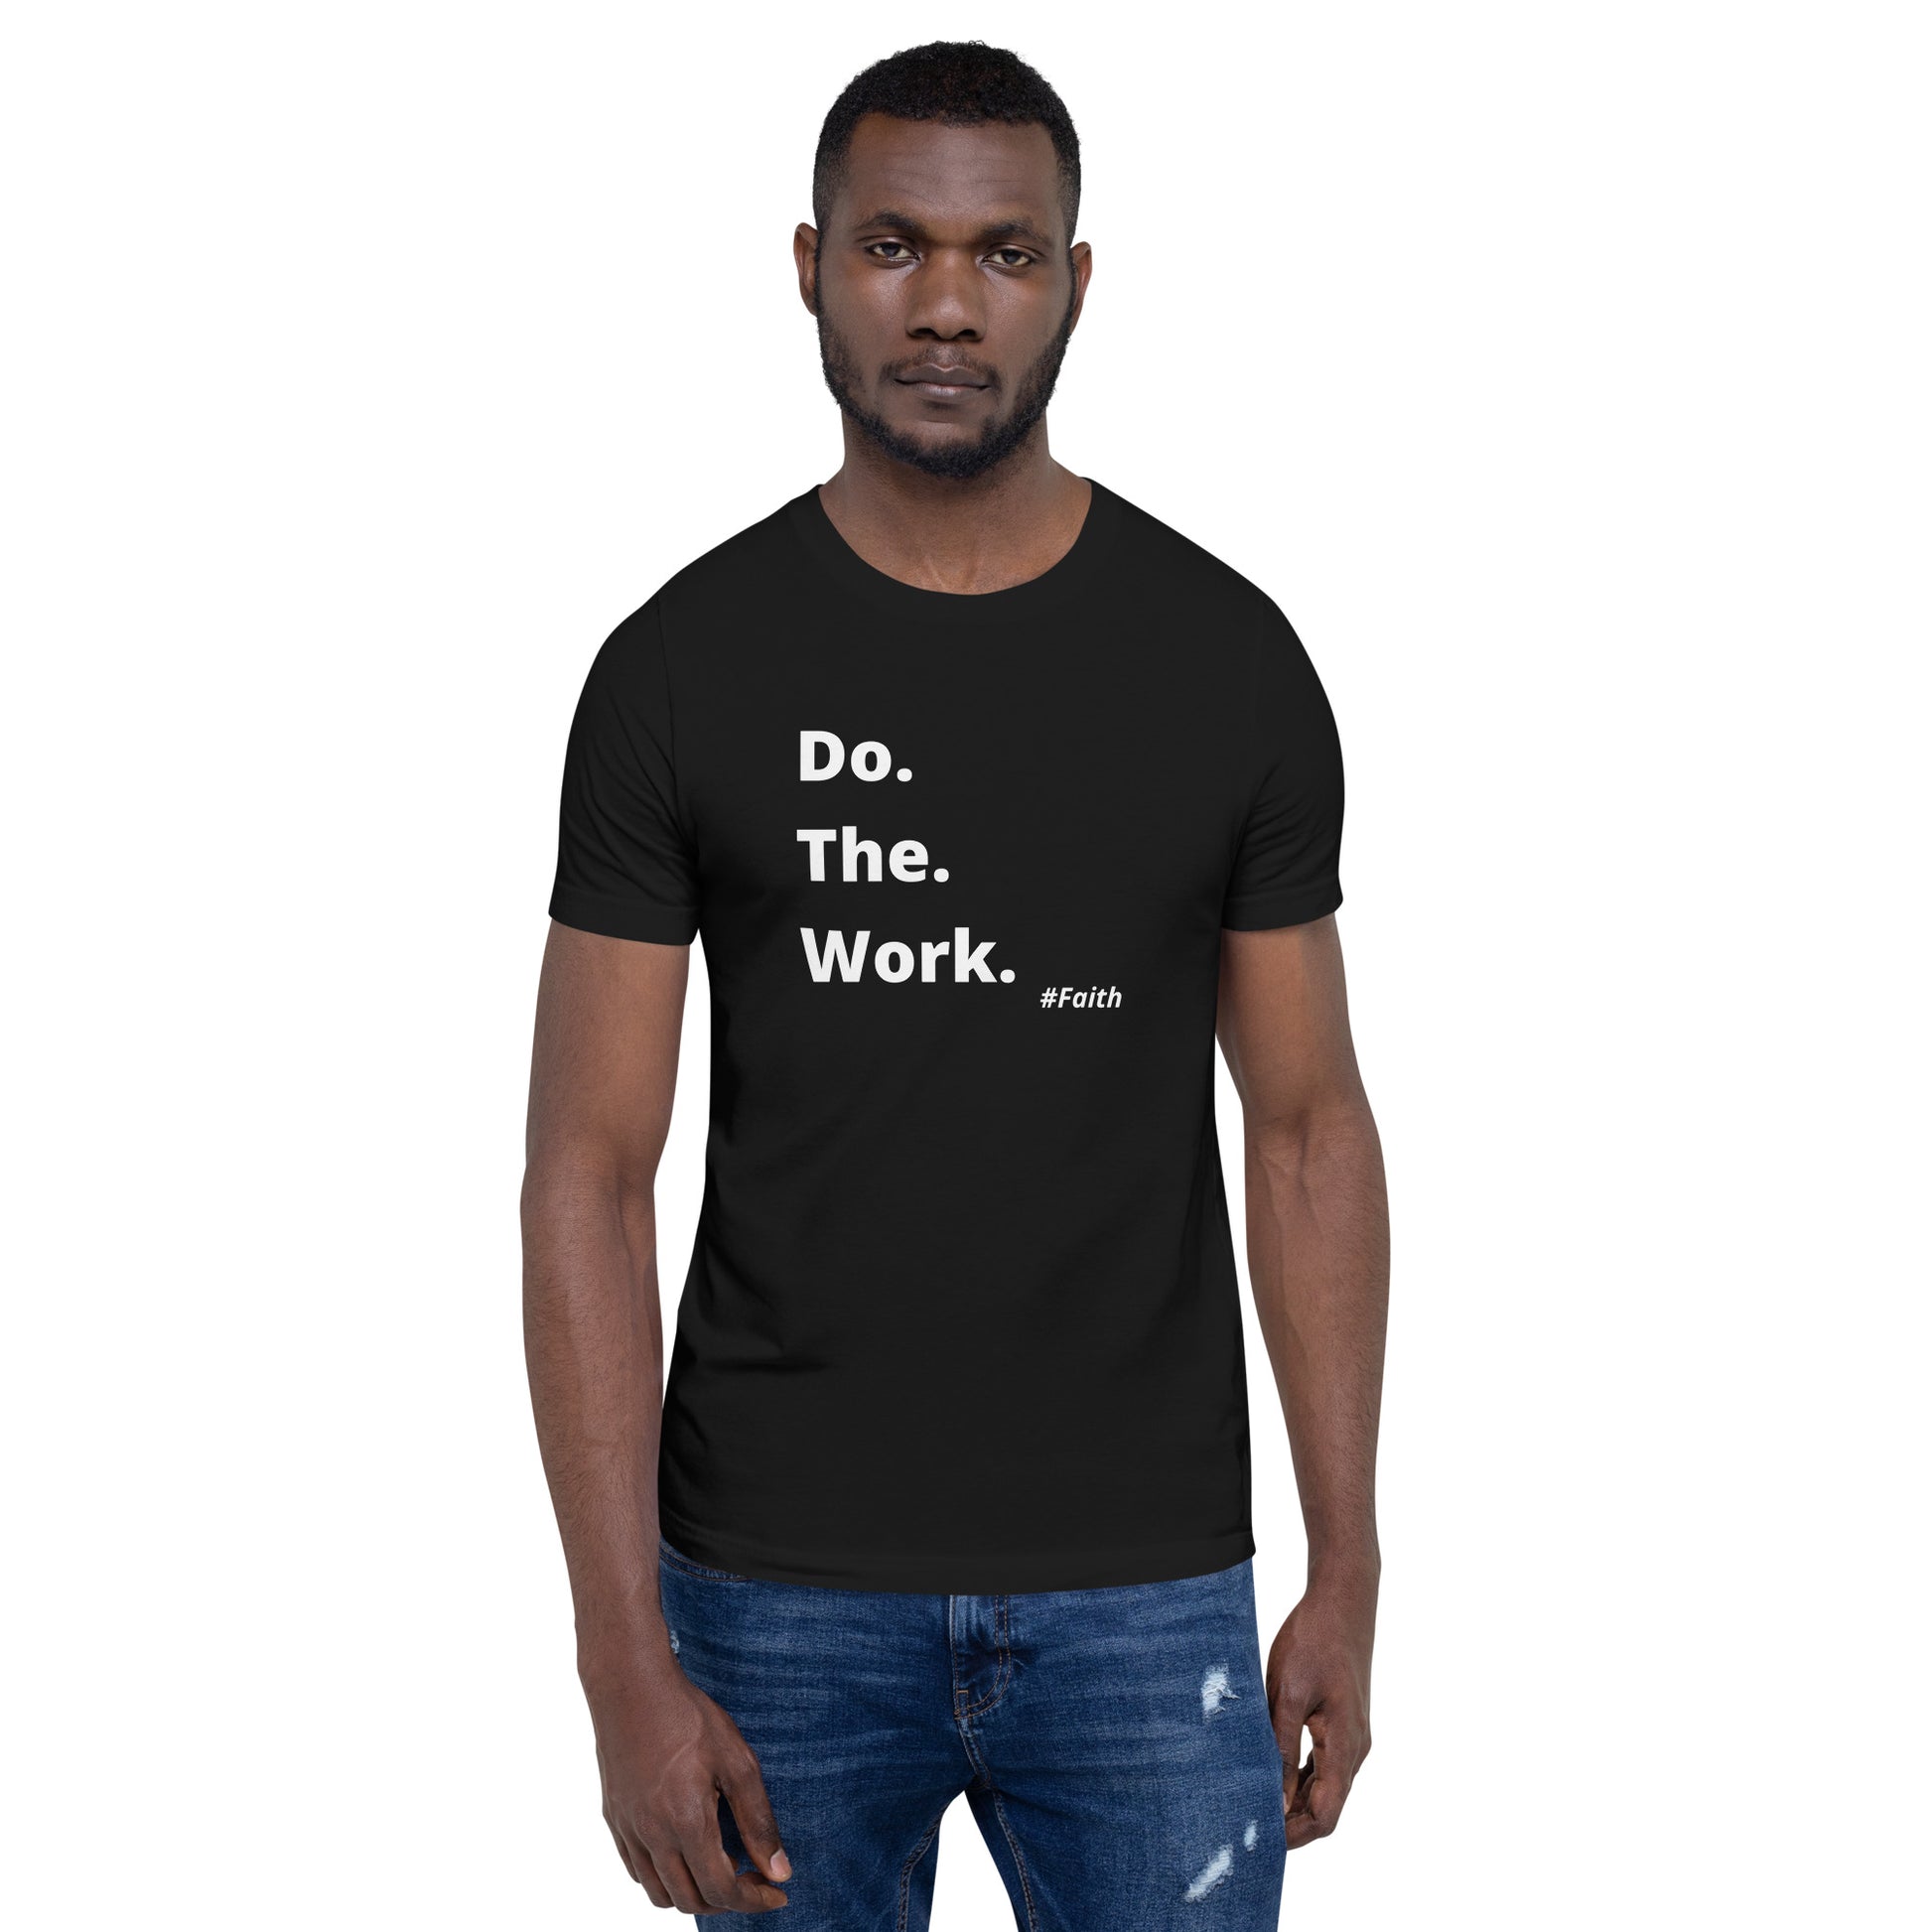 Do. The. Work. Short-Sleeve Unisex T-Shirt - Black – F.A.I.T.H. Connection